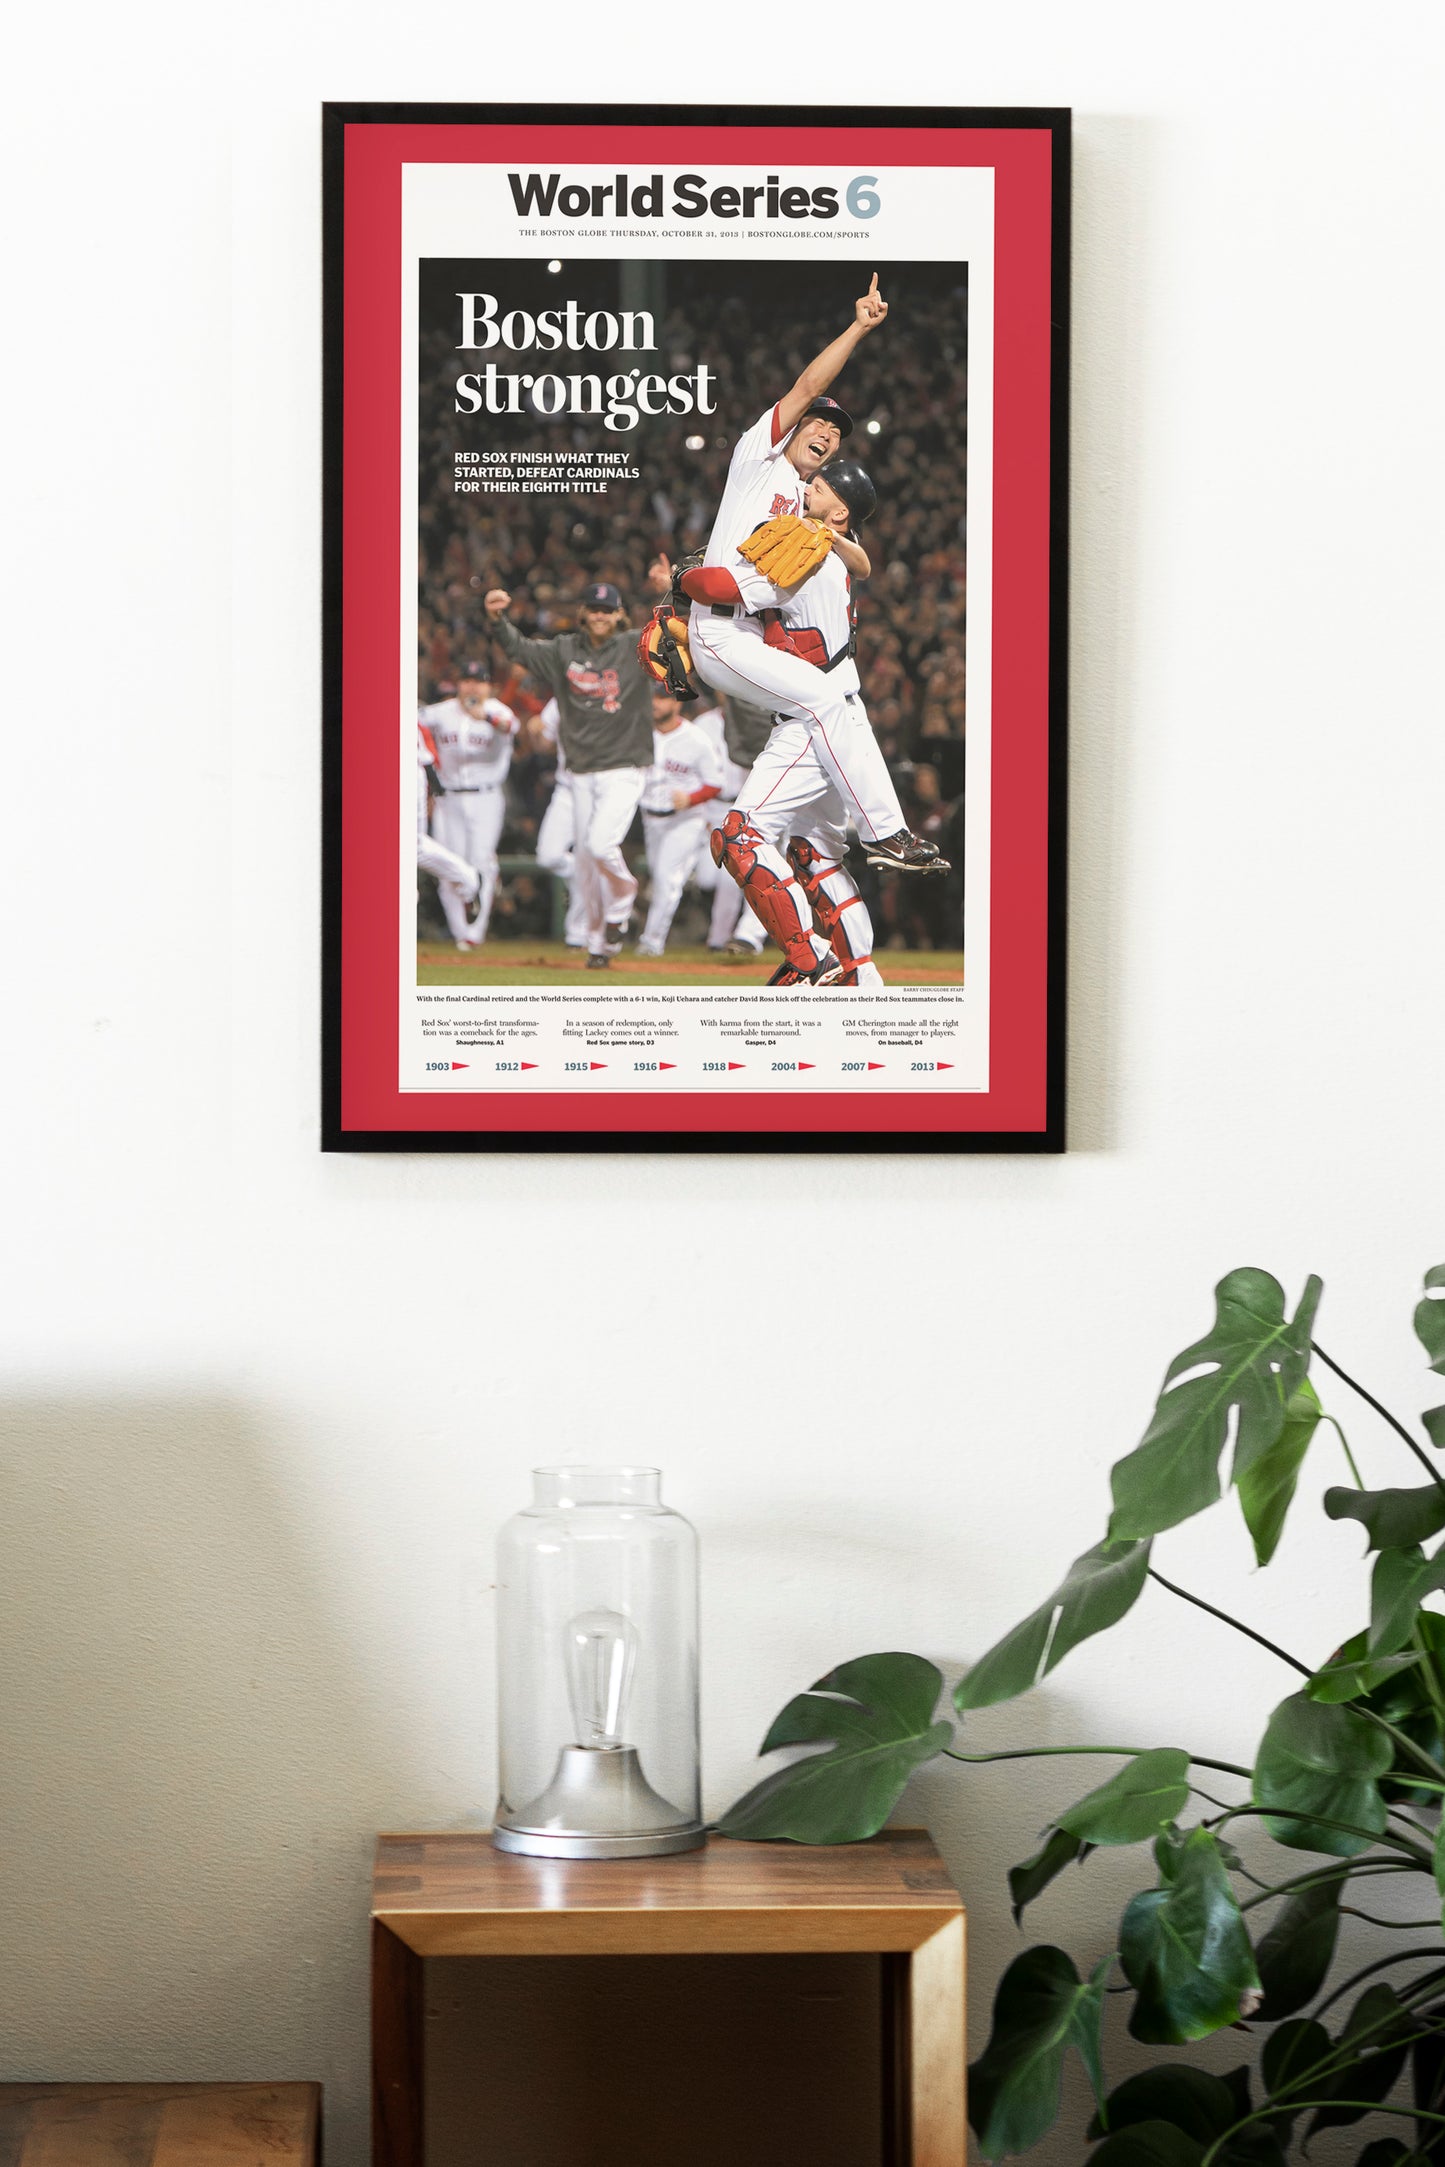 Boston Red Sox 2013 World Series MLB Champions Front Cover The Boston Globe Newspaper Poster